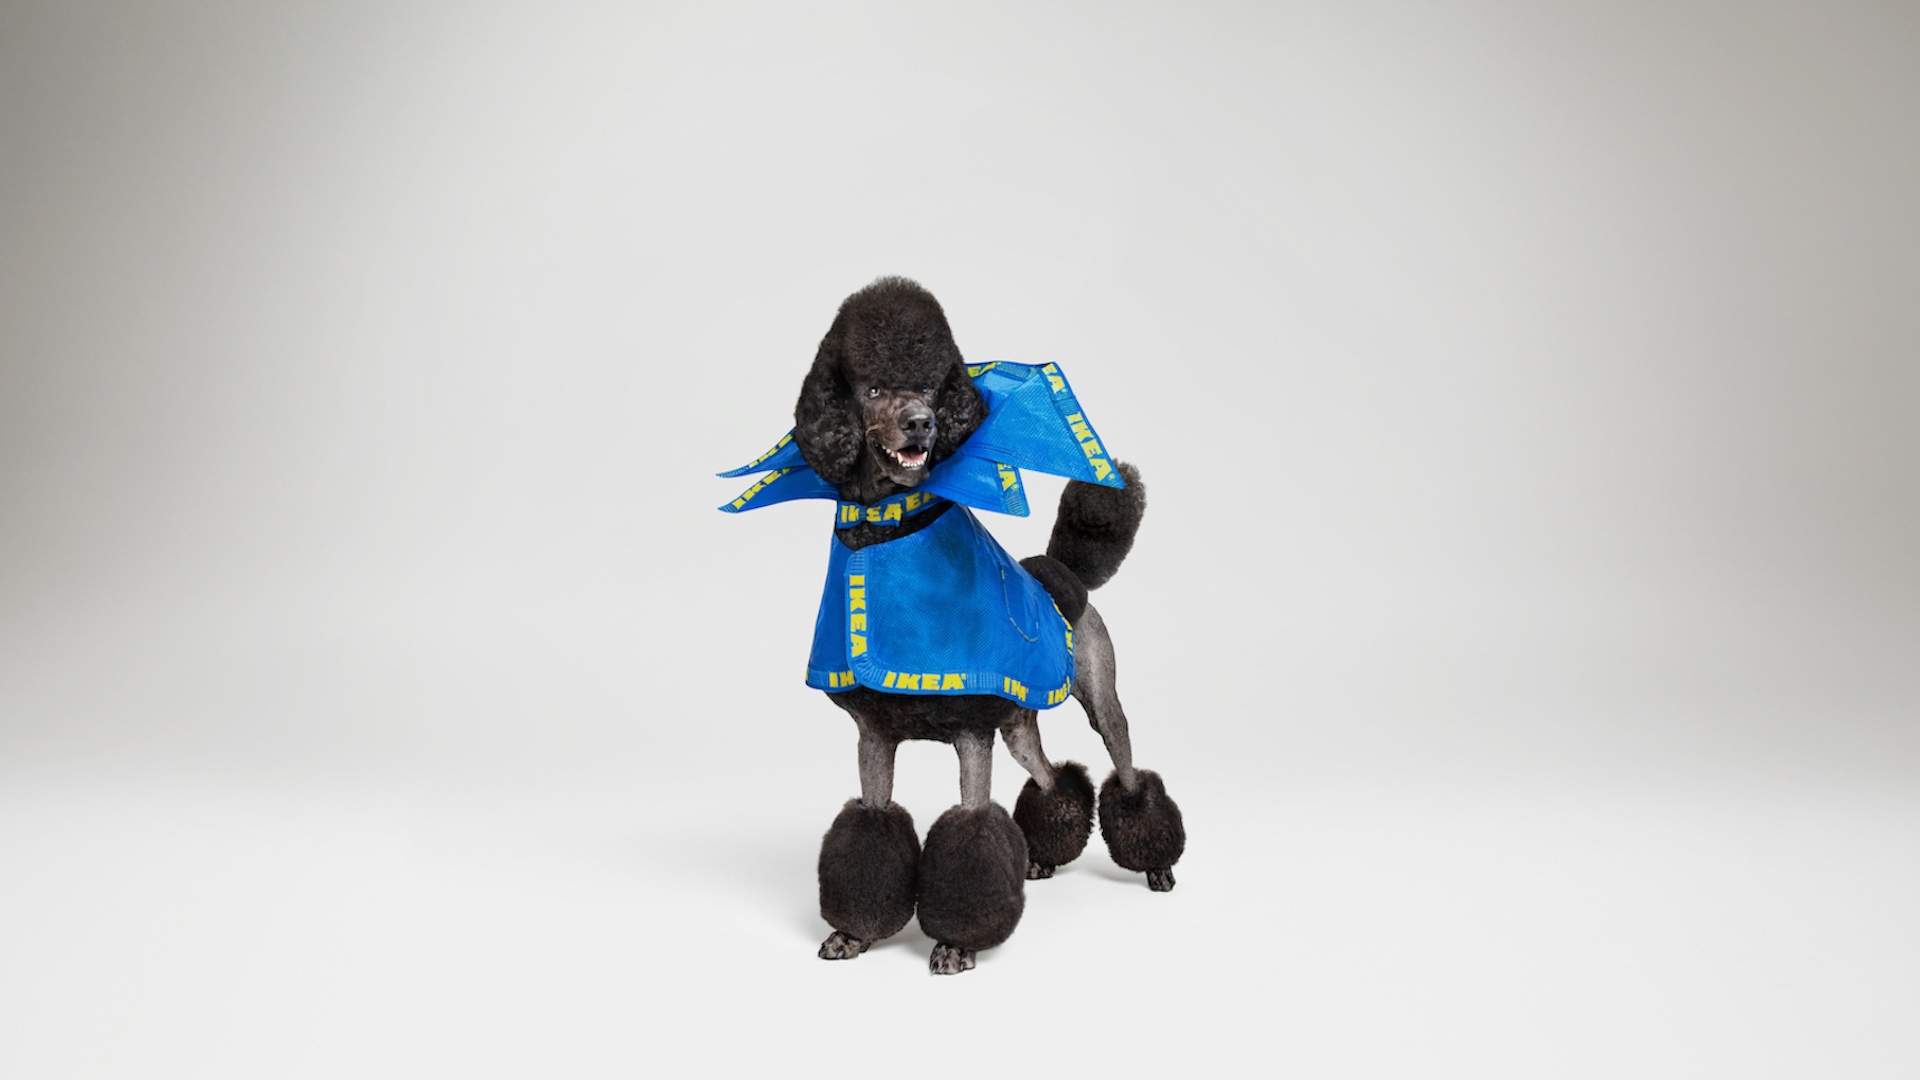 IKEA Wants You to Turn Its Iconic Blue Shopping Bags Into Outfits for Your Dog